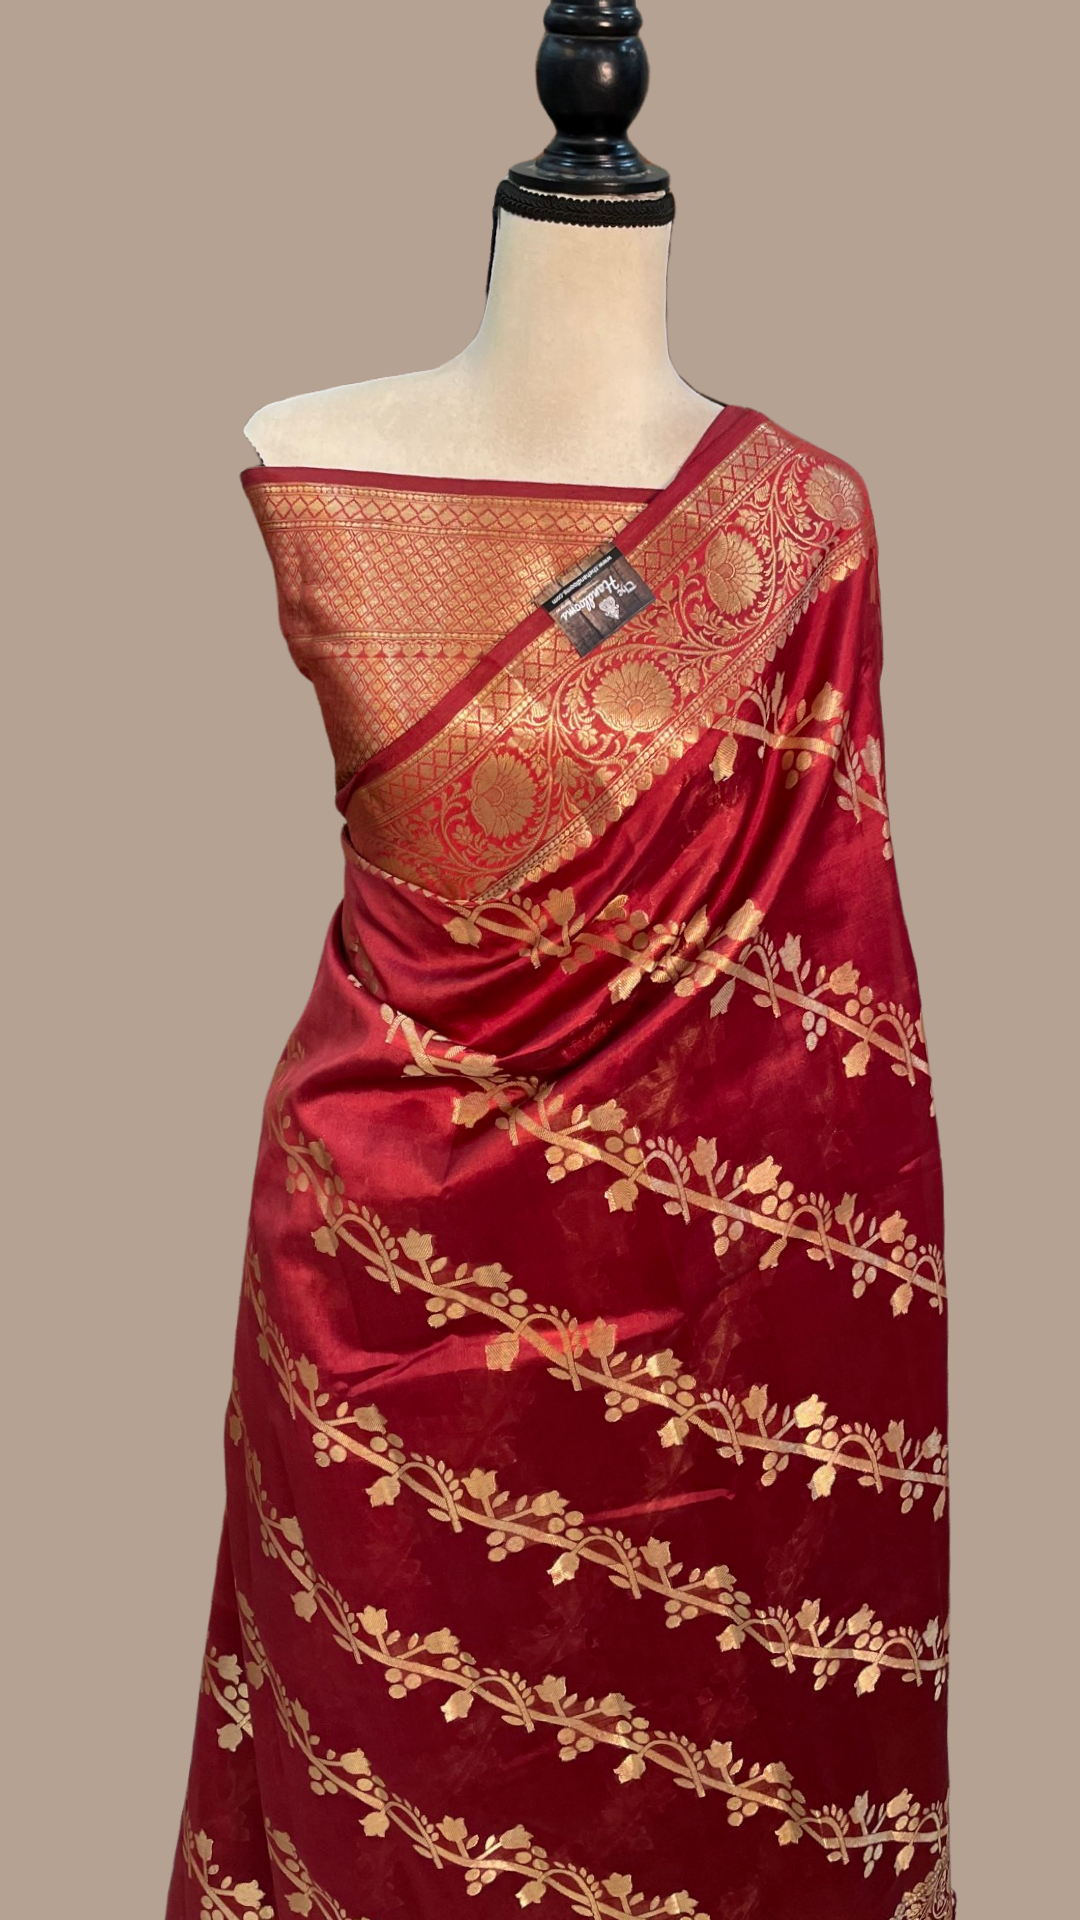 Elegance Personified: Dupion Silk Sarees for Special Occasions